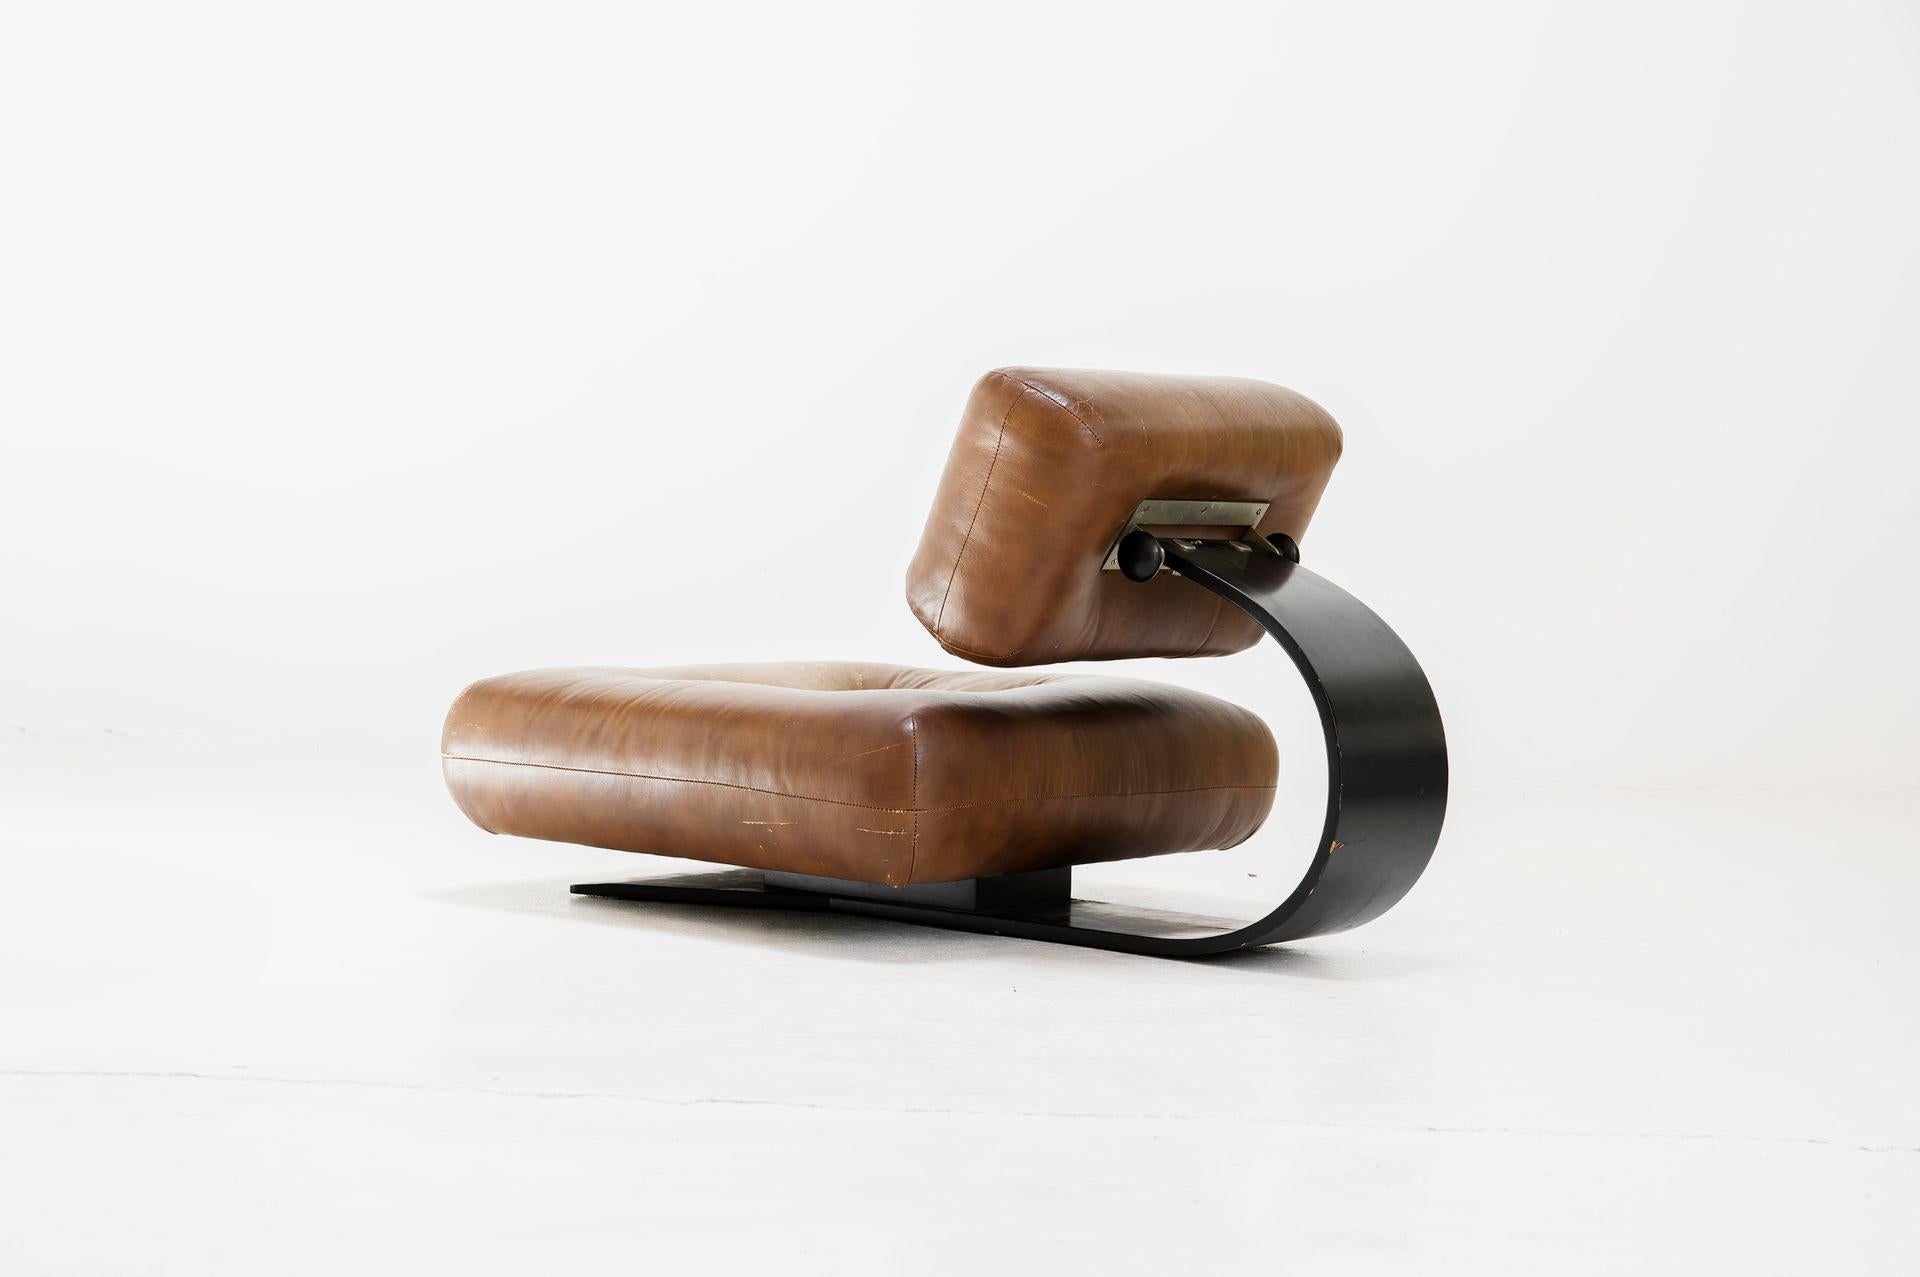 Armchair model “Alta”
Manufactured by Tendo Brasileira Brasil, 1978 Leather, painted and molded plywood, steel
Measurements
104,1 cm x 68,6 cm x 56,h5 cm 41 in x 27 in x 22,3h in